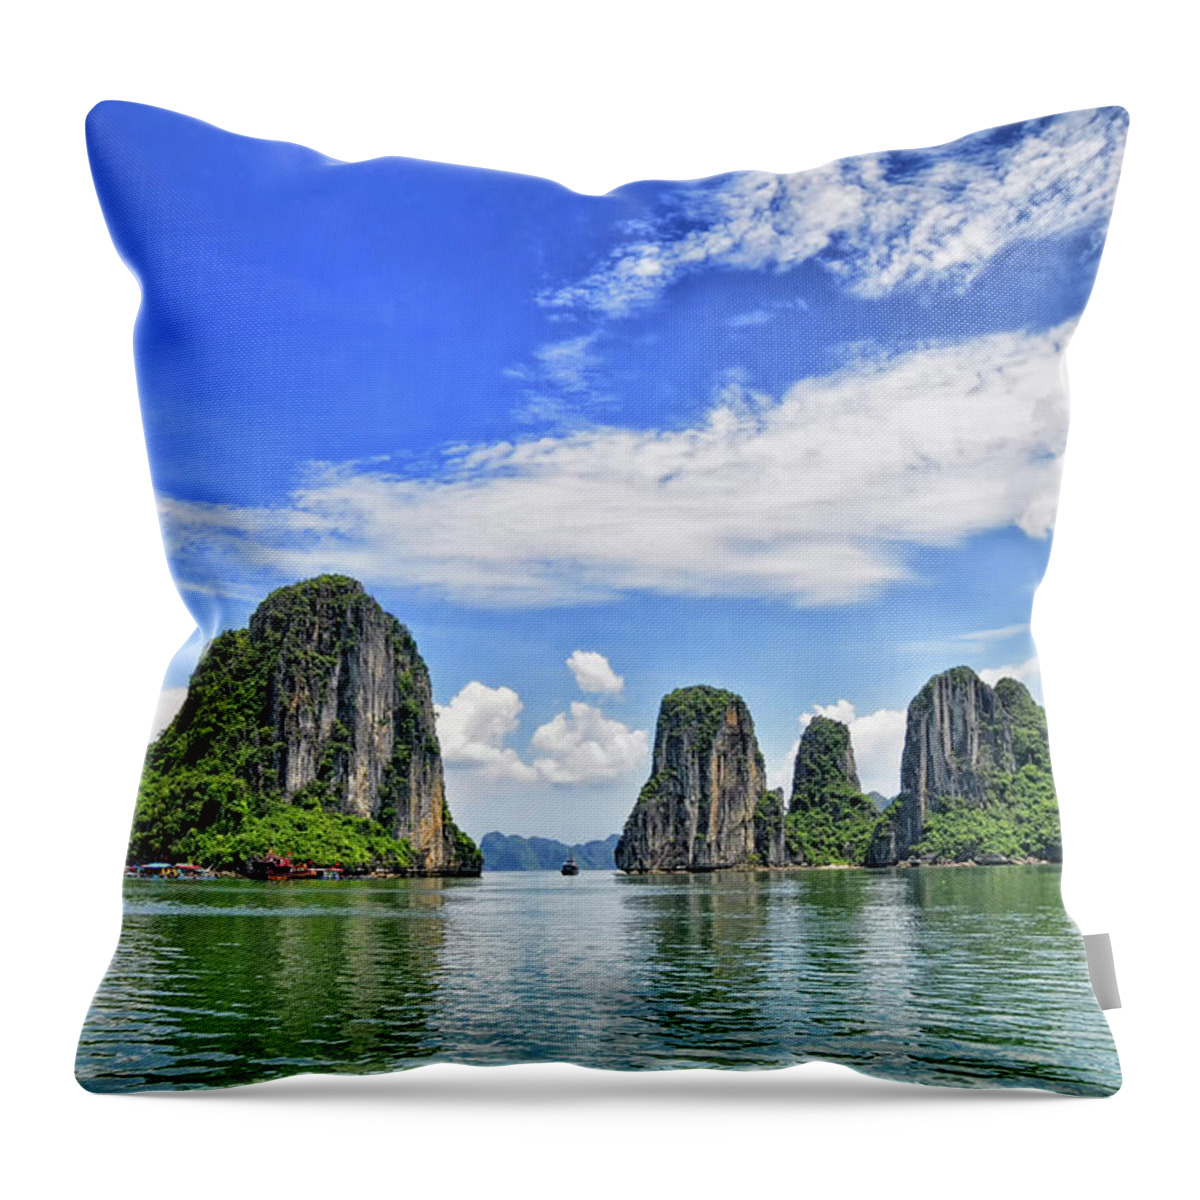 Scenics Throw Pillow featuring the photograph Halong Bay, Vietnam by Photo By Salvador Manaois Iii